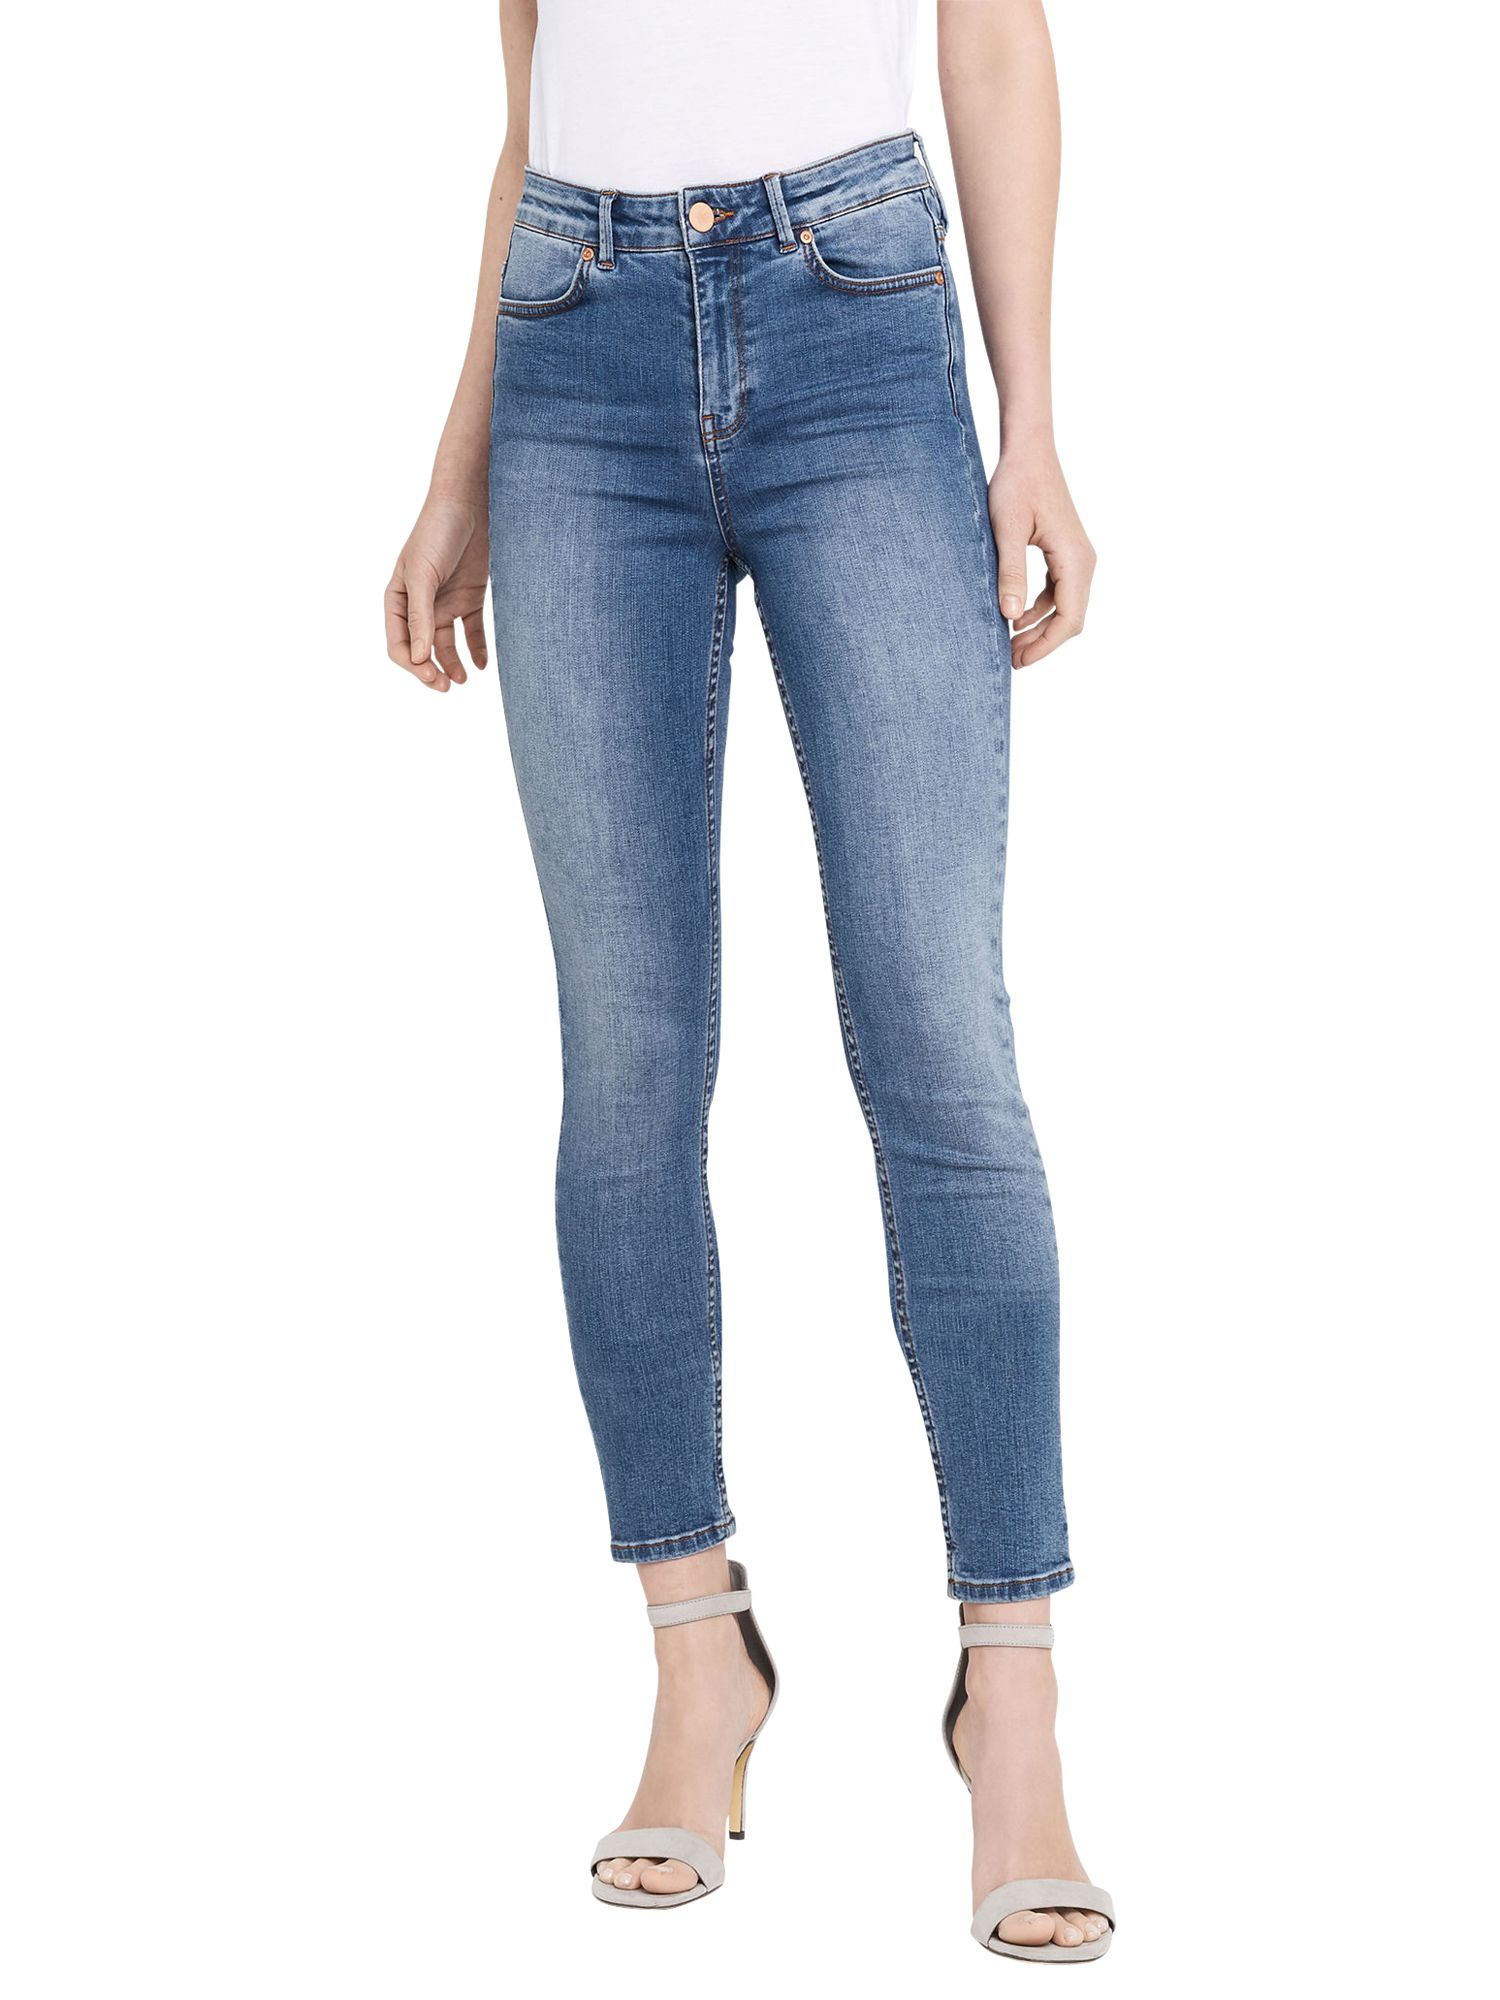 Oasis Lily Stiletto Skinny Jeans, Light Wash at John Lewis & Partners